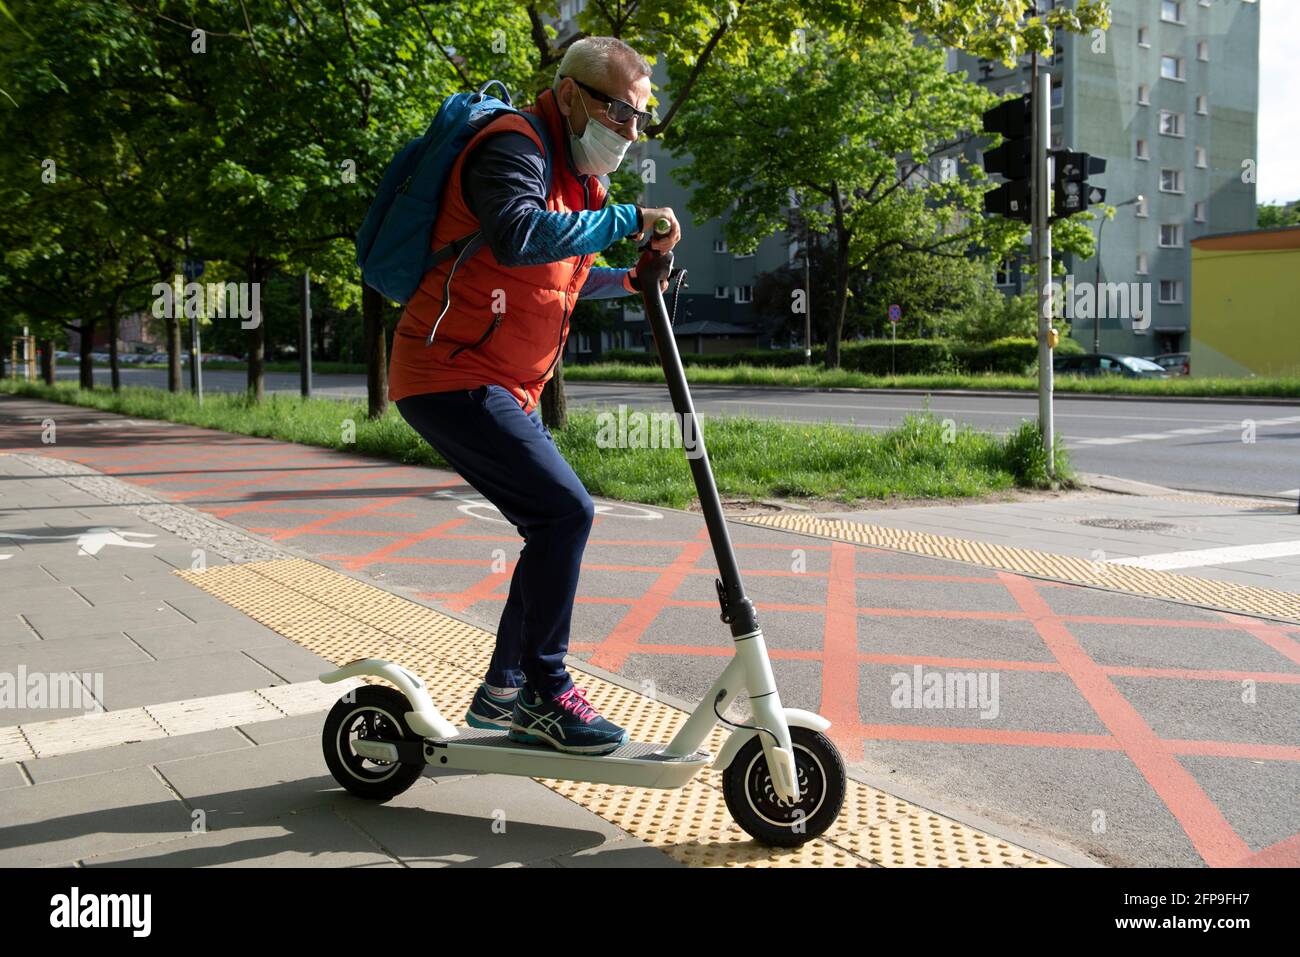 Warsaw, Warsaw, Poland. 20th May, 2021. A man rides an e-scooter on May 20,  2021 in Warsaw, Poland. The Polish parliament passed a bill that regulates  the usage of e-scooters in Poland